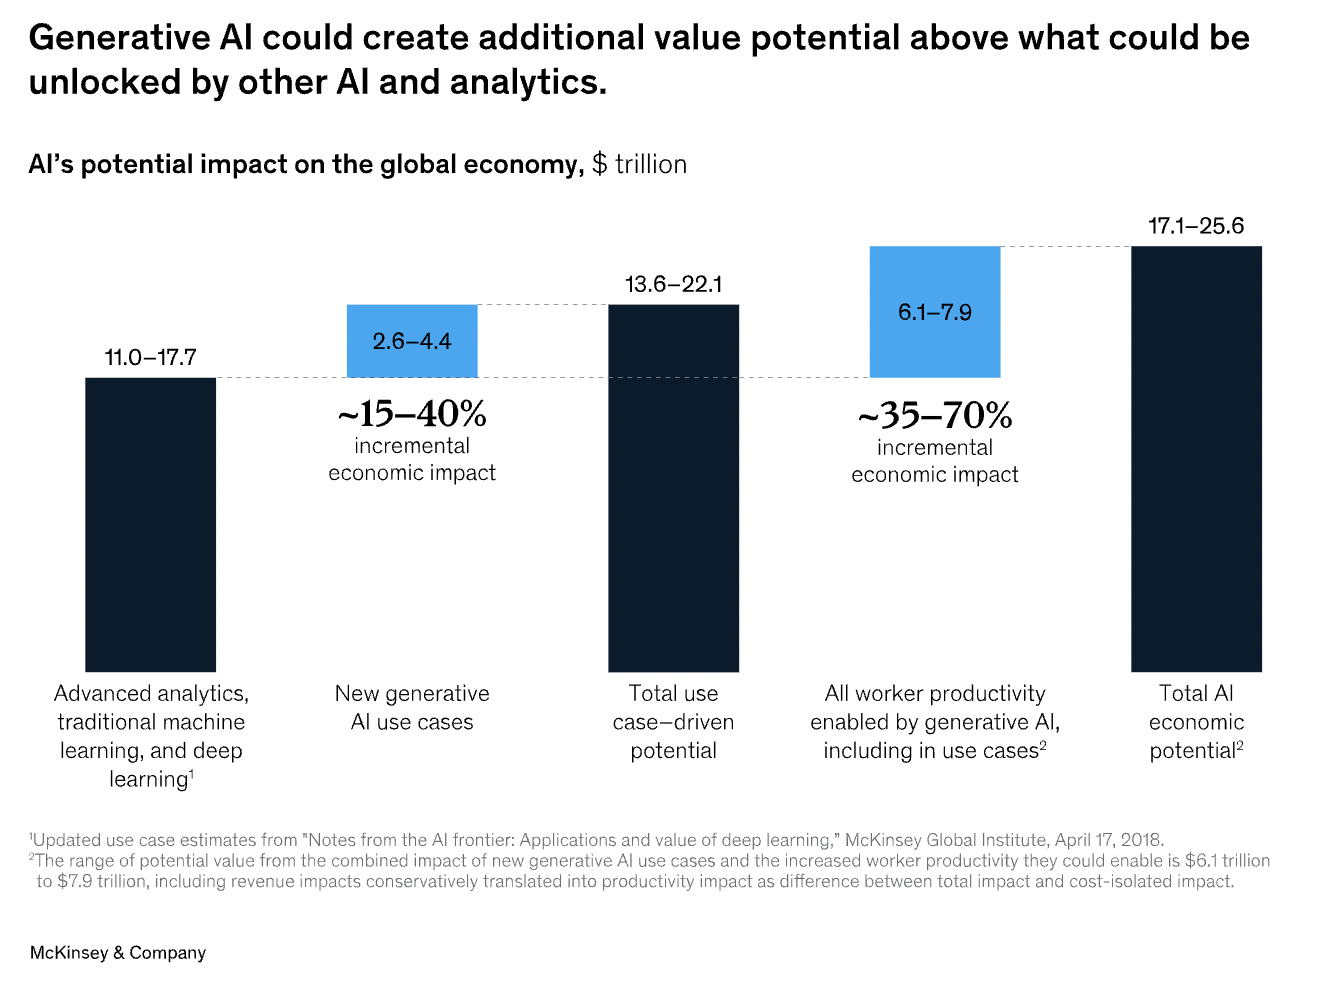 The potential impact of Generative A I on the global economy could be an increase of trillions of dollars